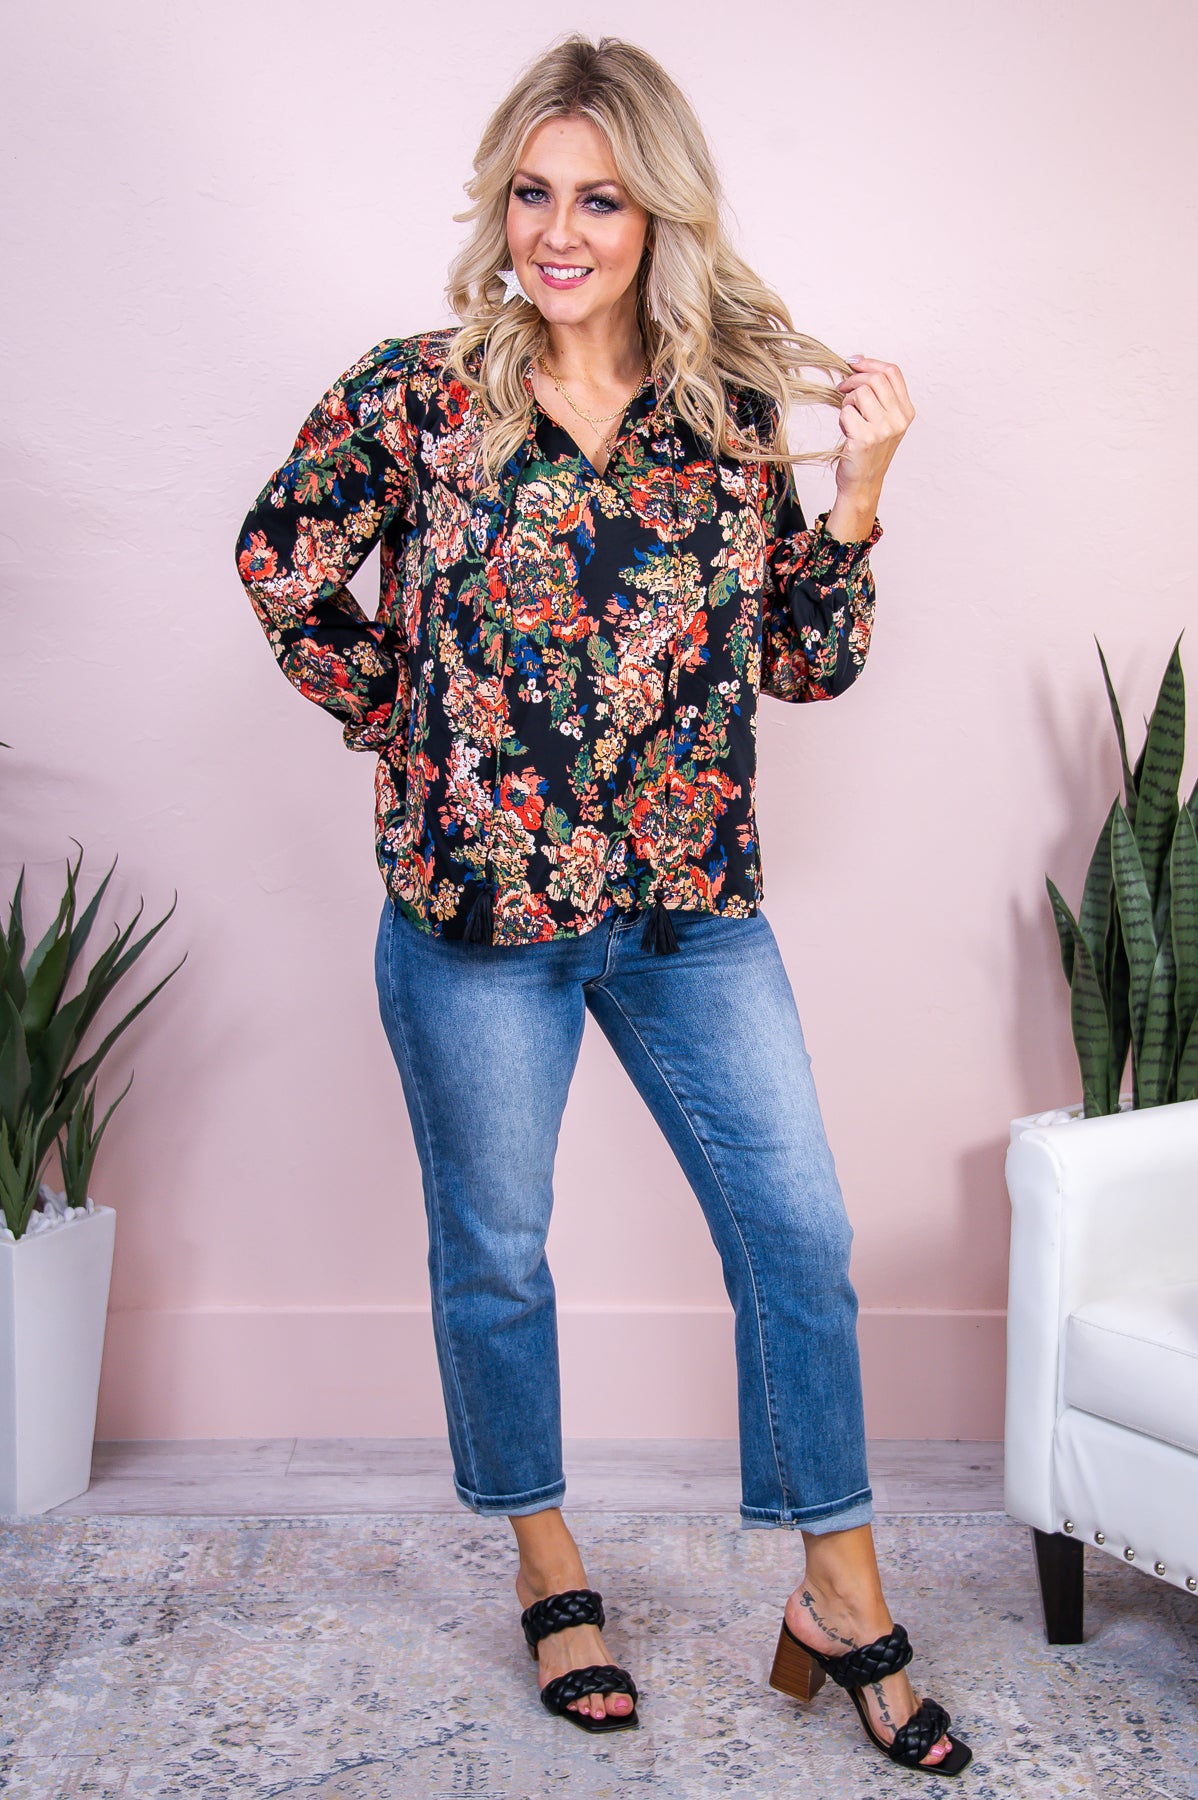 Gather The Courage Black/Multi Color Floral Top - T7984BK